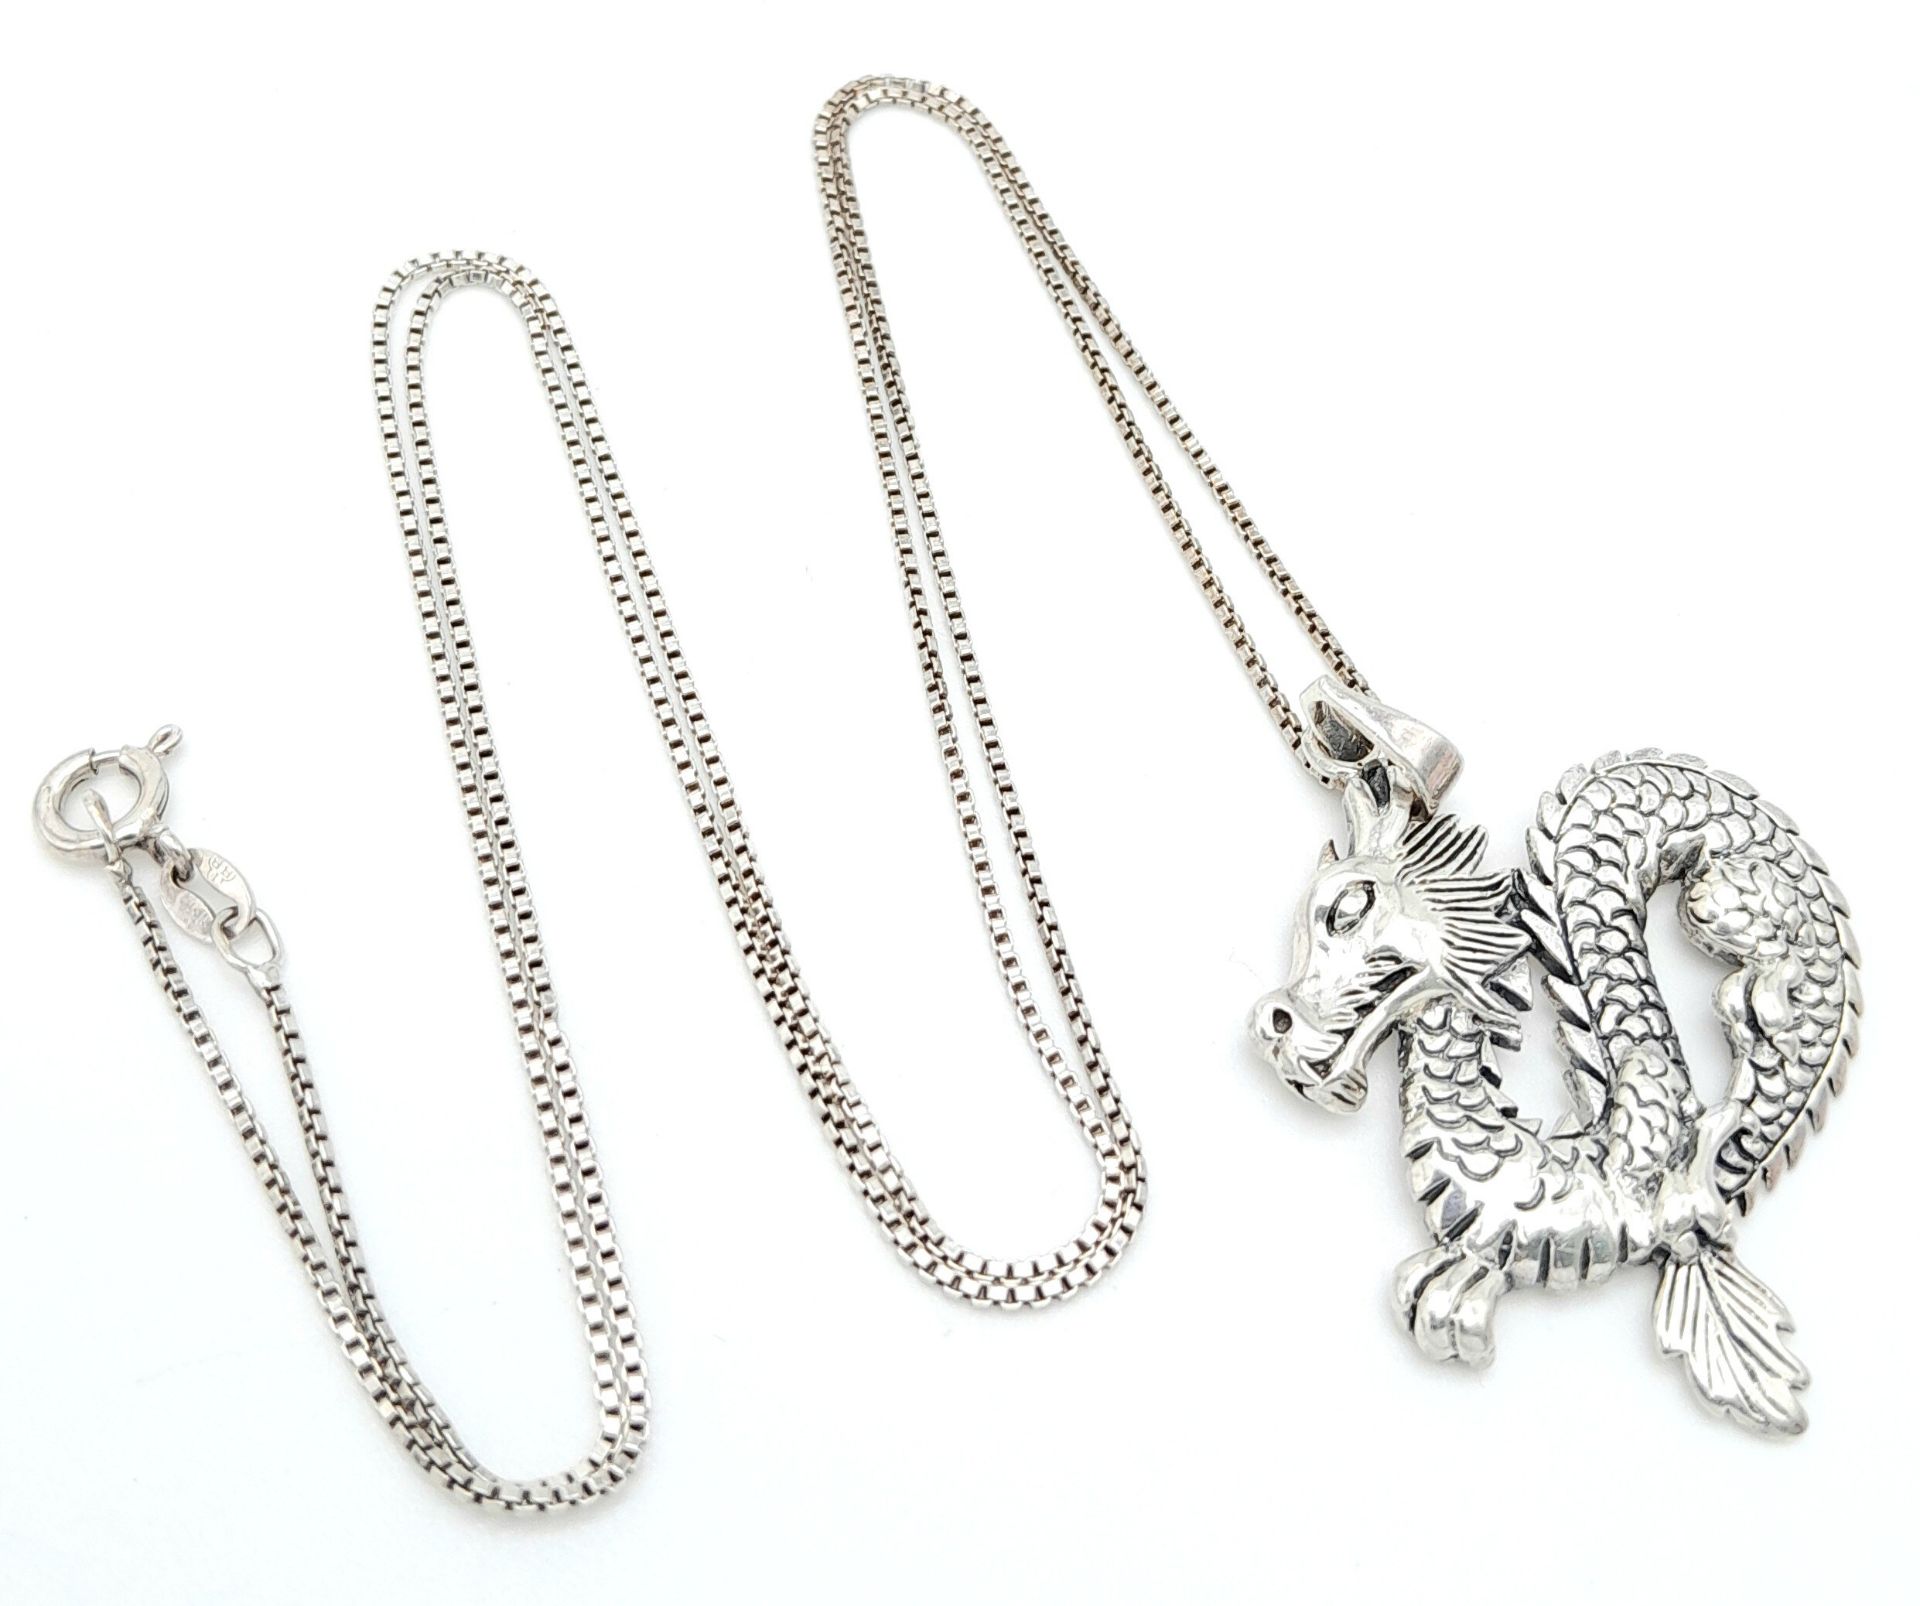 A Sterling Silver Dragon Pendant on 925 Silver Chain. 4.5cm pendant, 62cm chain. 9.7g total weight.